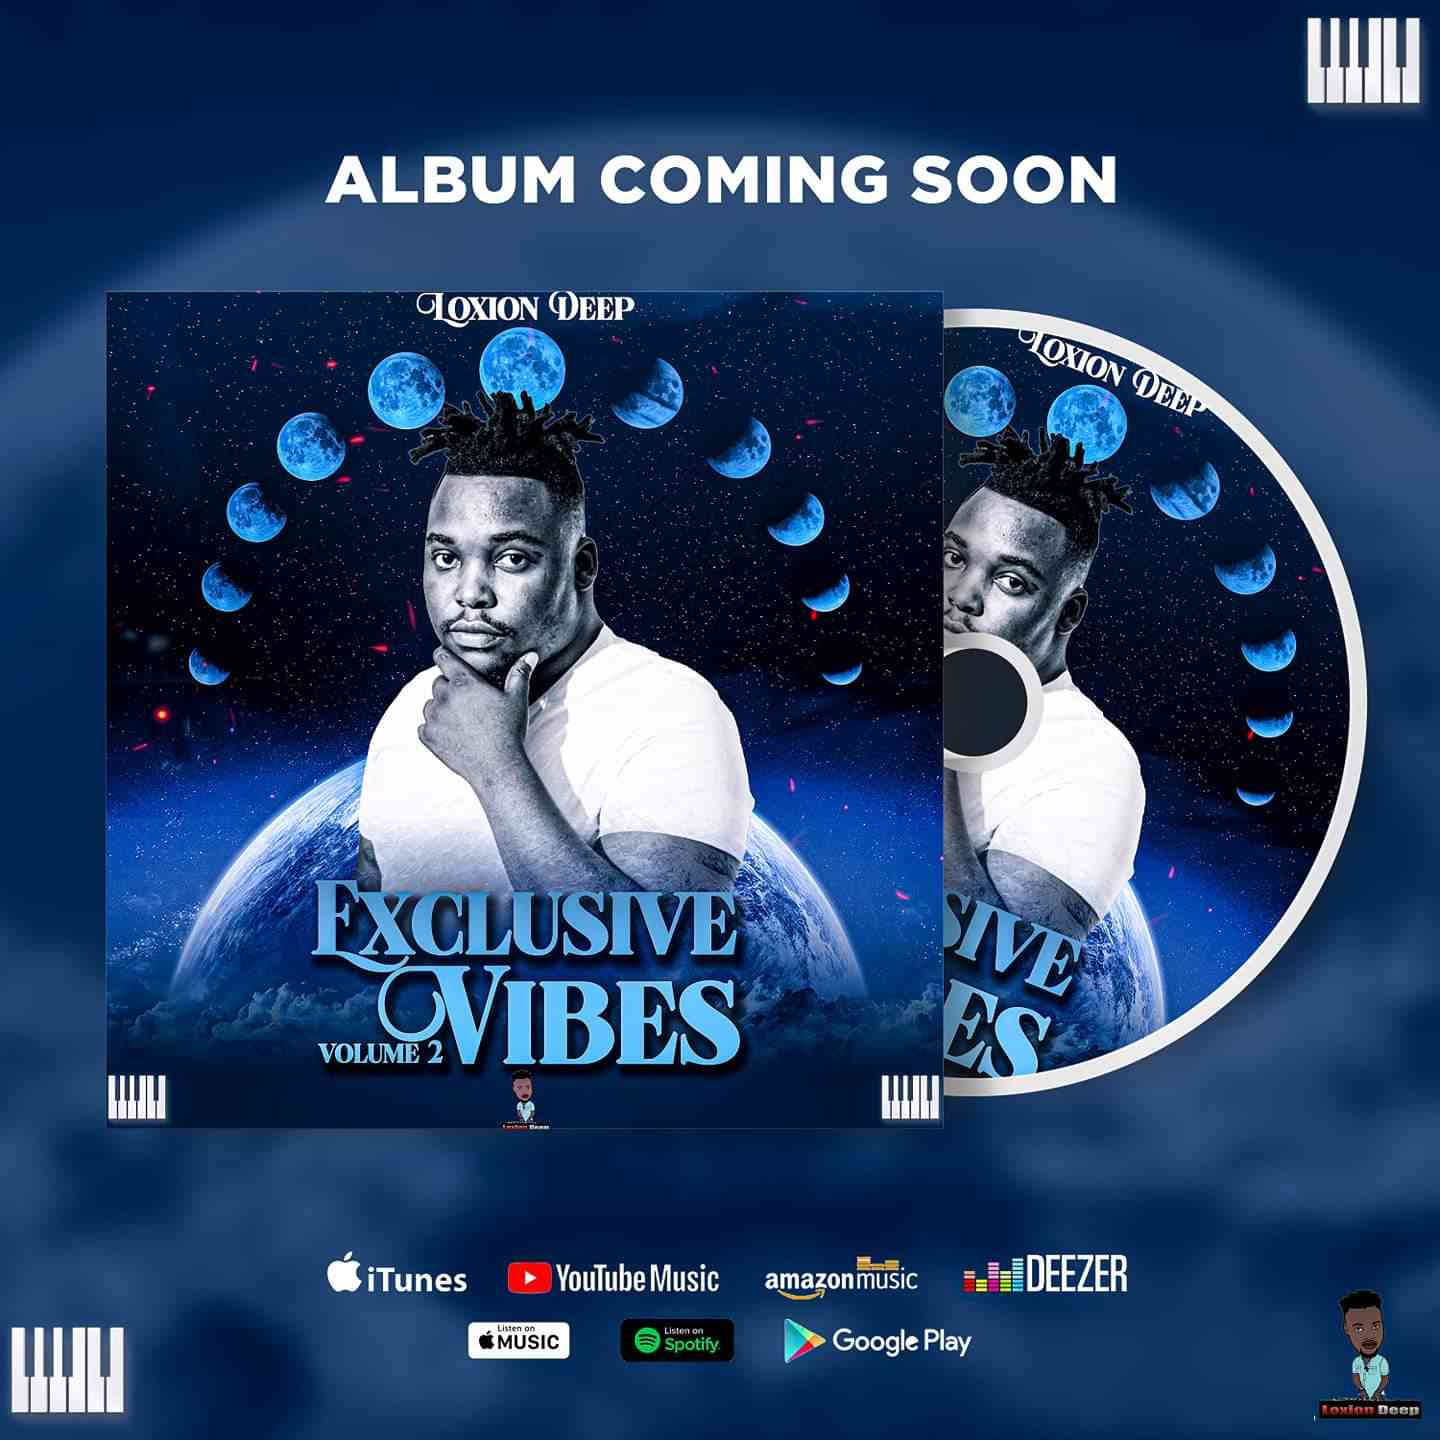 Loxion Deep Now Ready For Exclusive Vibes Vol. 2 Album